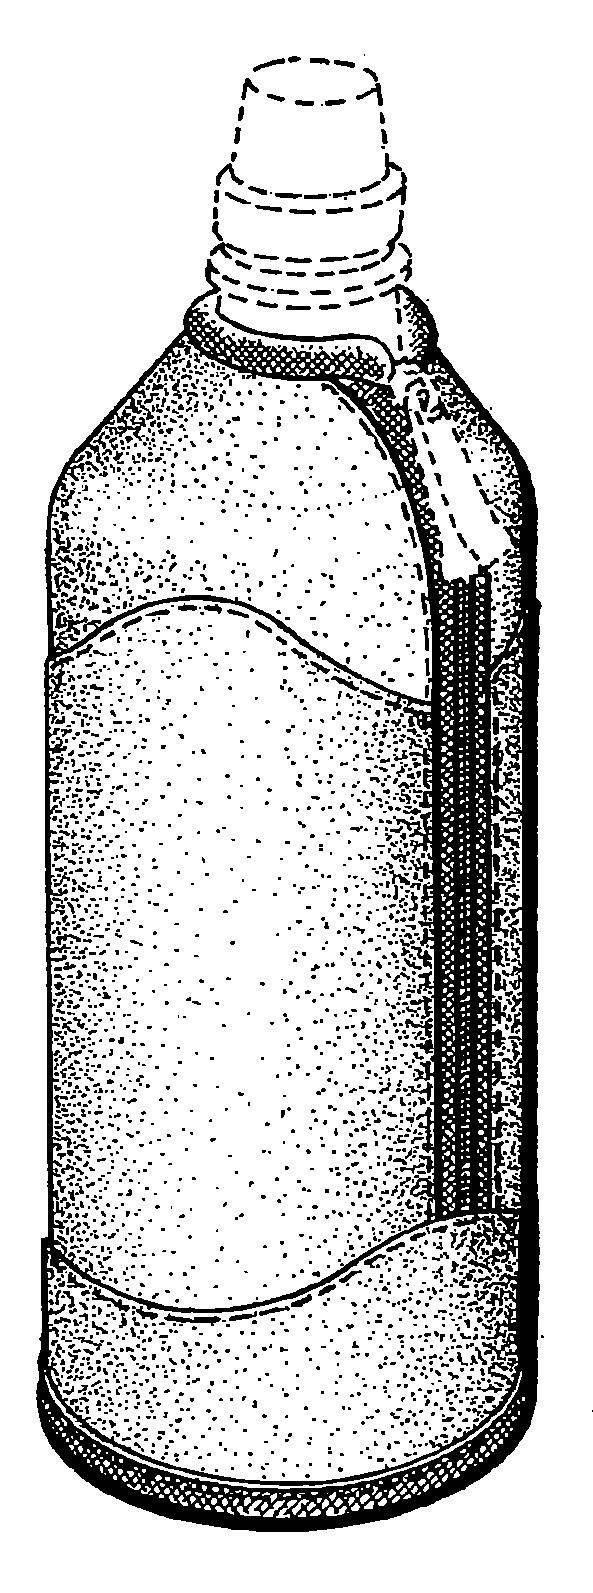 Example of a design for a sheath type holder for a beveragecontainer that includes a closure. 
